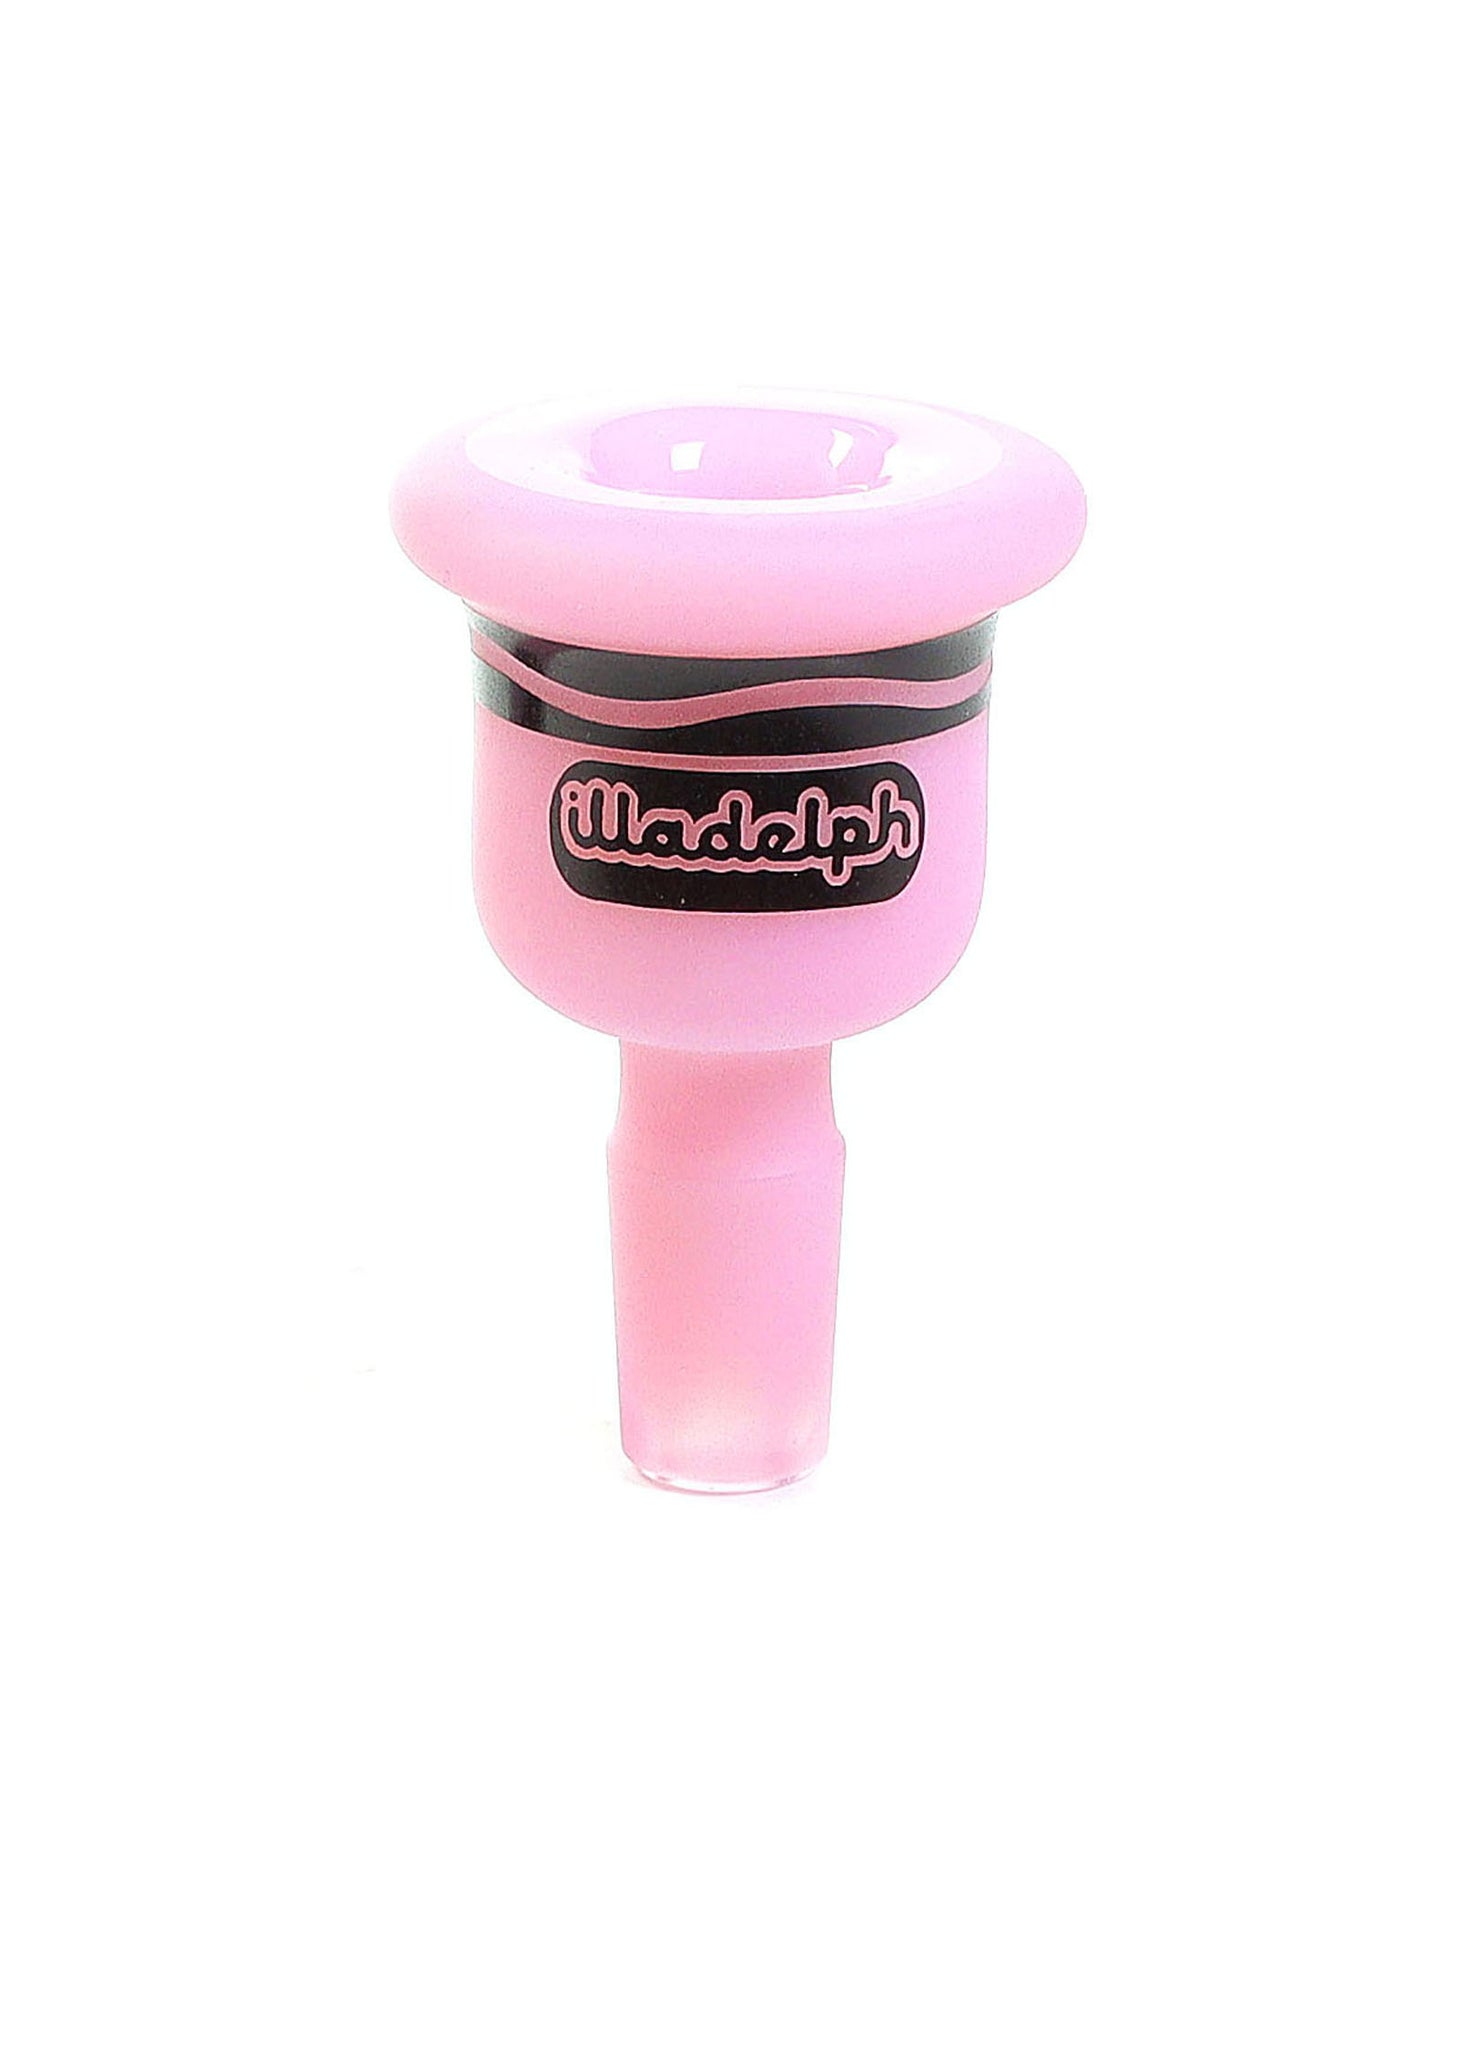 14/20 Milky Pink Crayon Bell